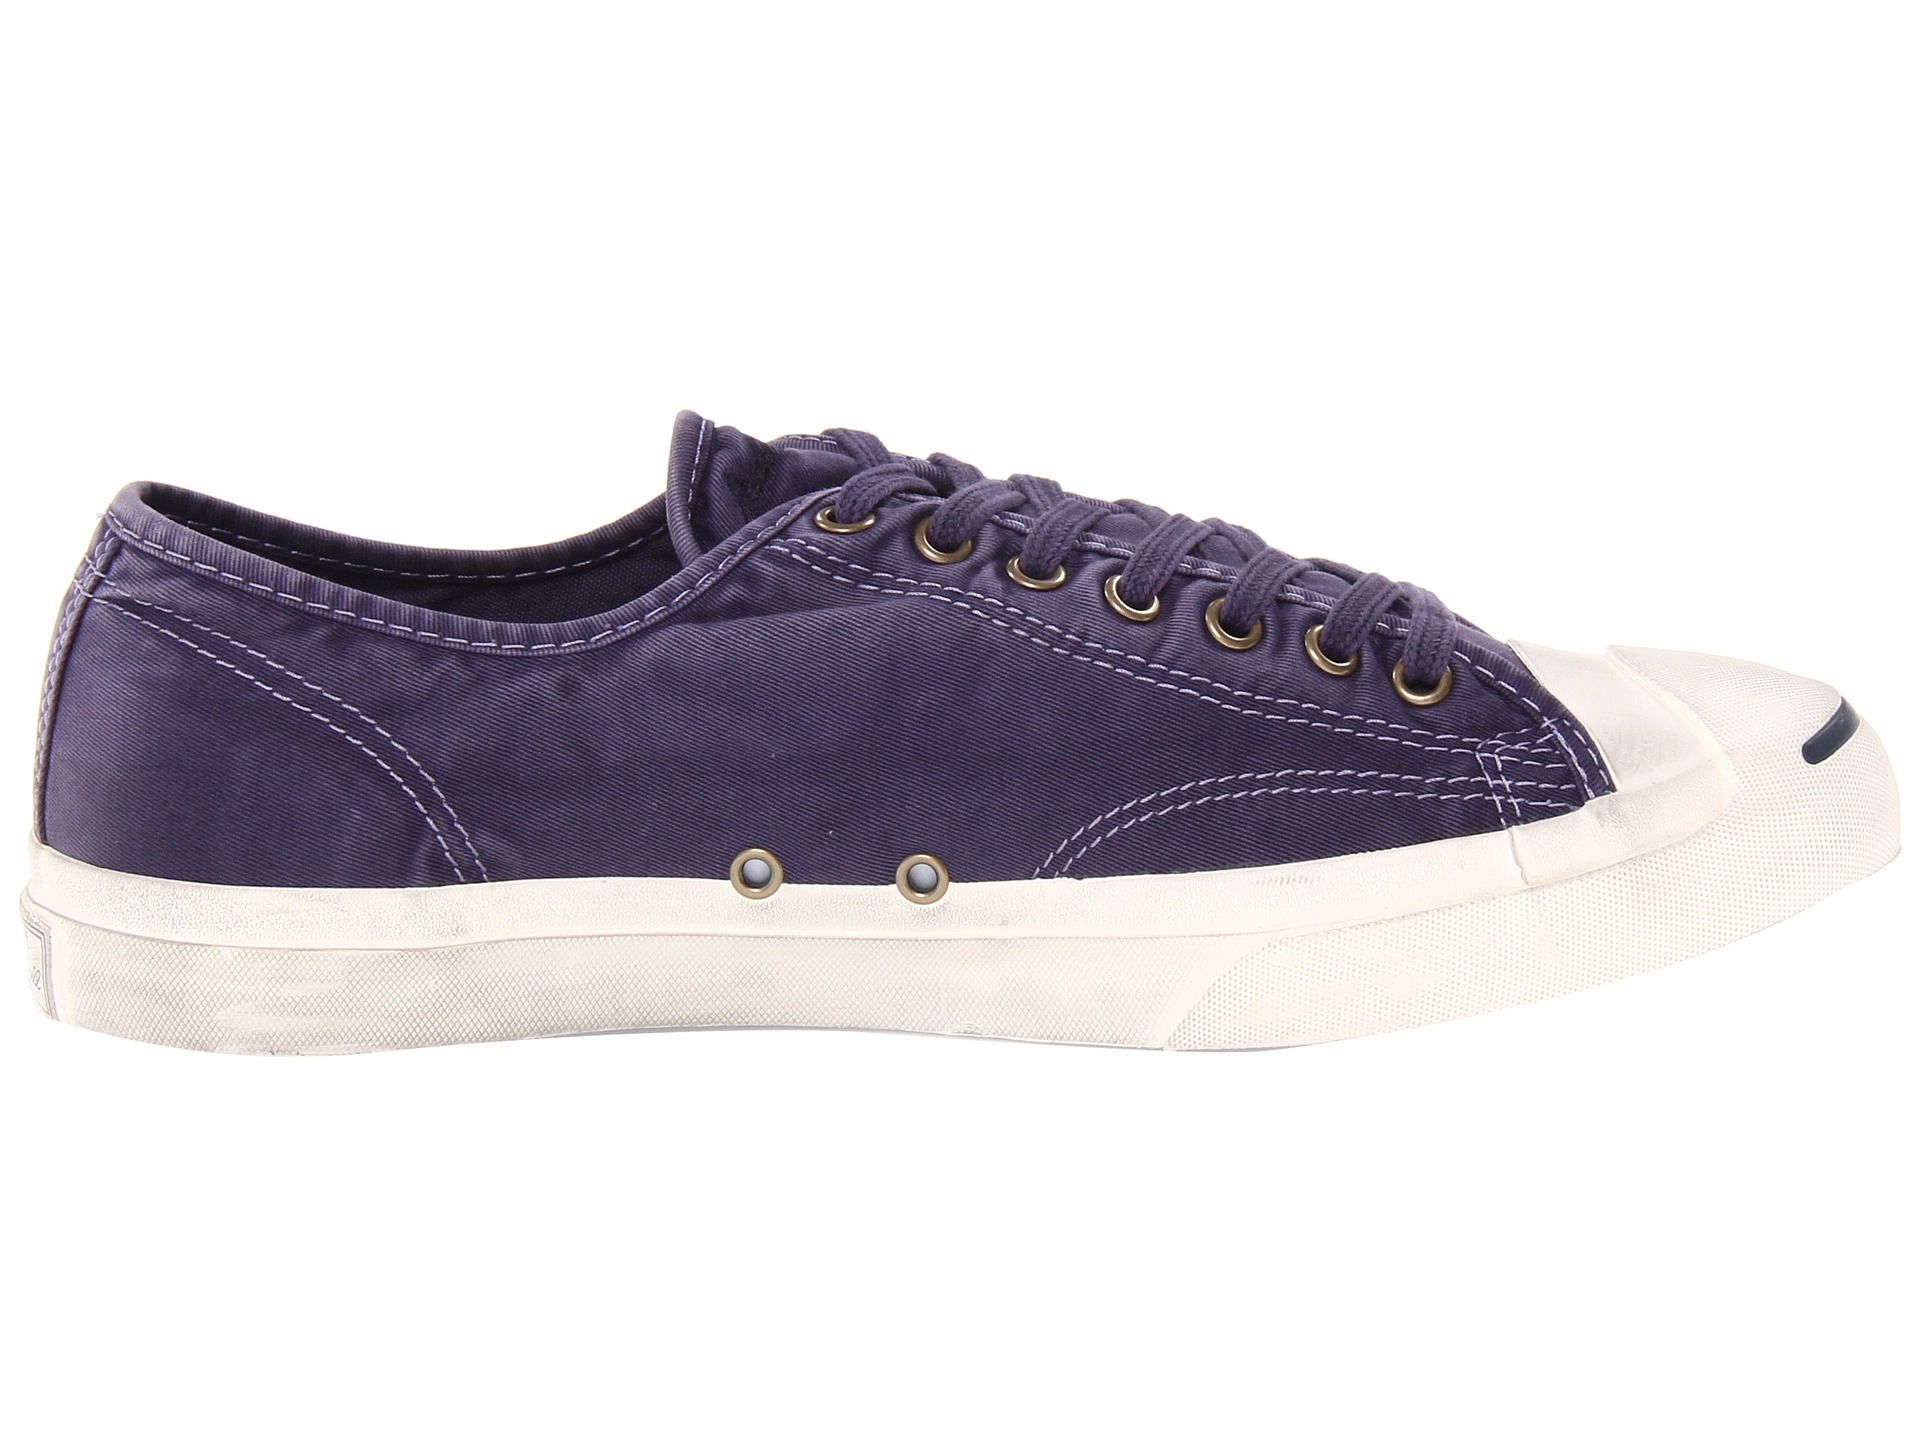 Converse Jack Purcell Ltt Washed Ox, Shoes | Shipped Free at Zappos